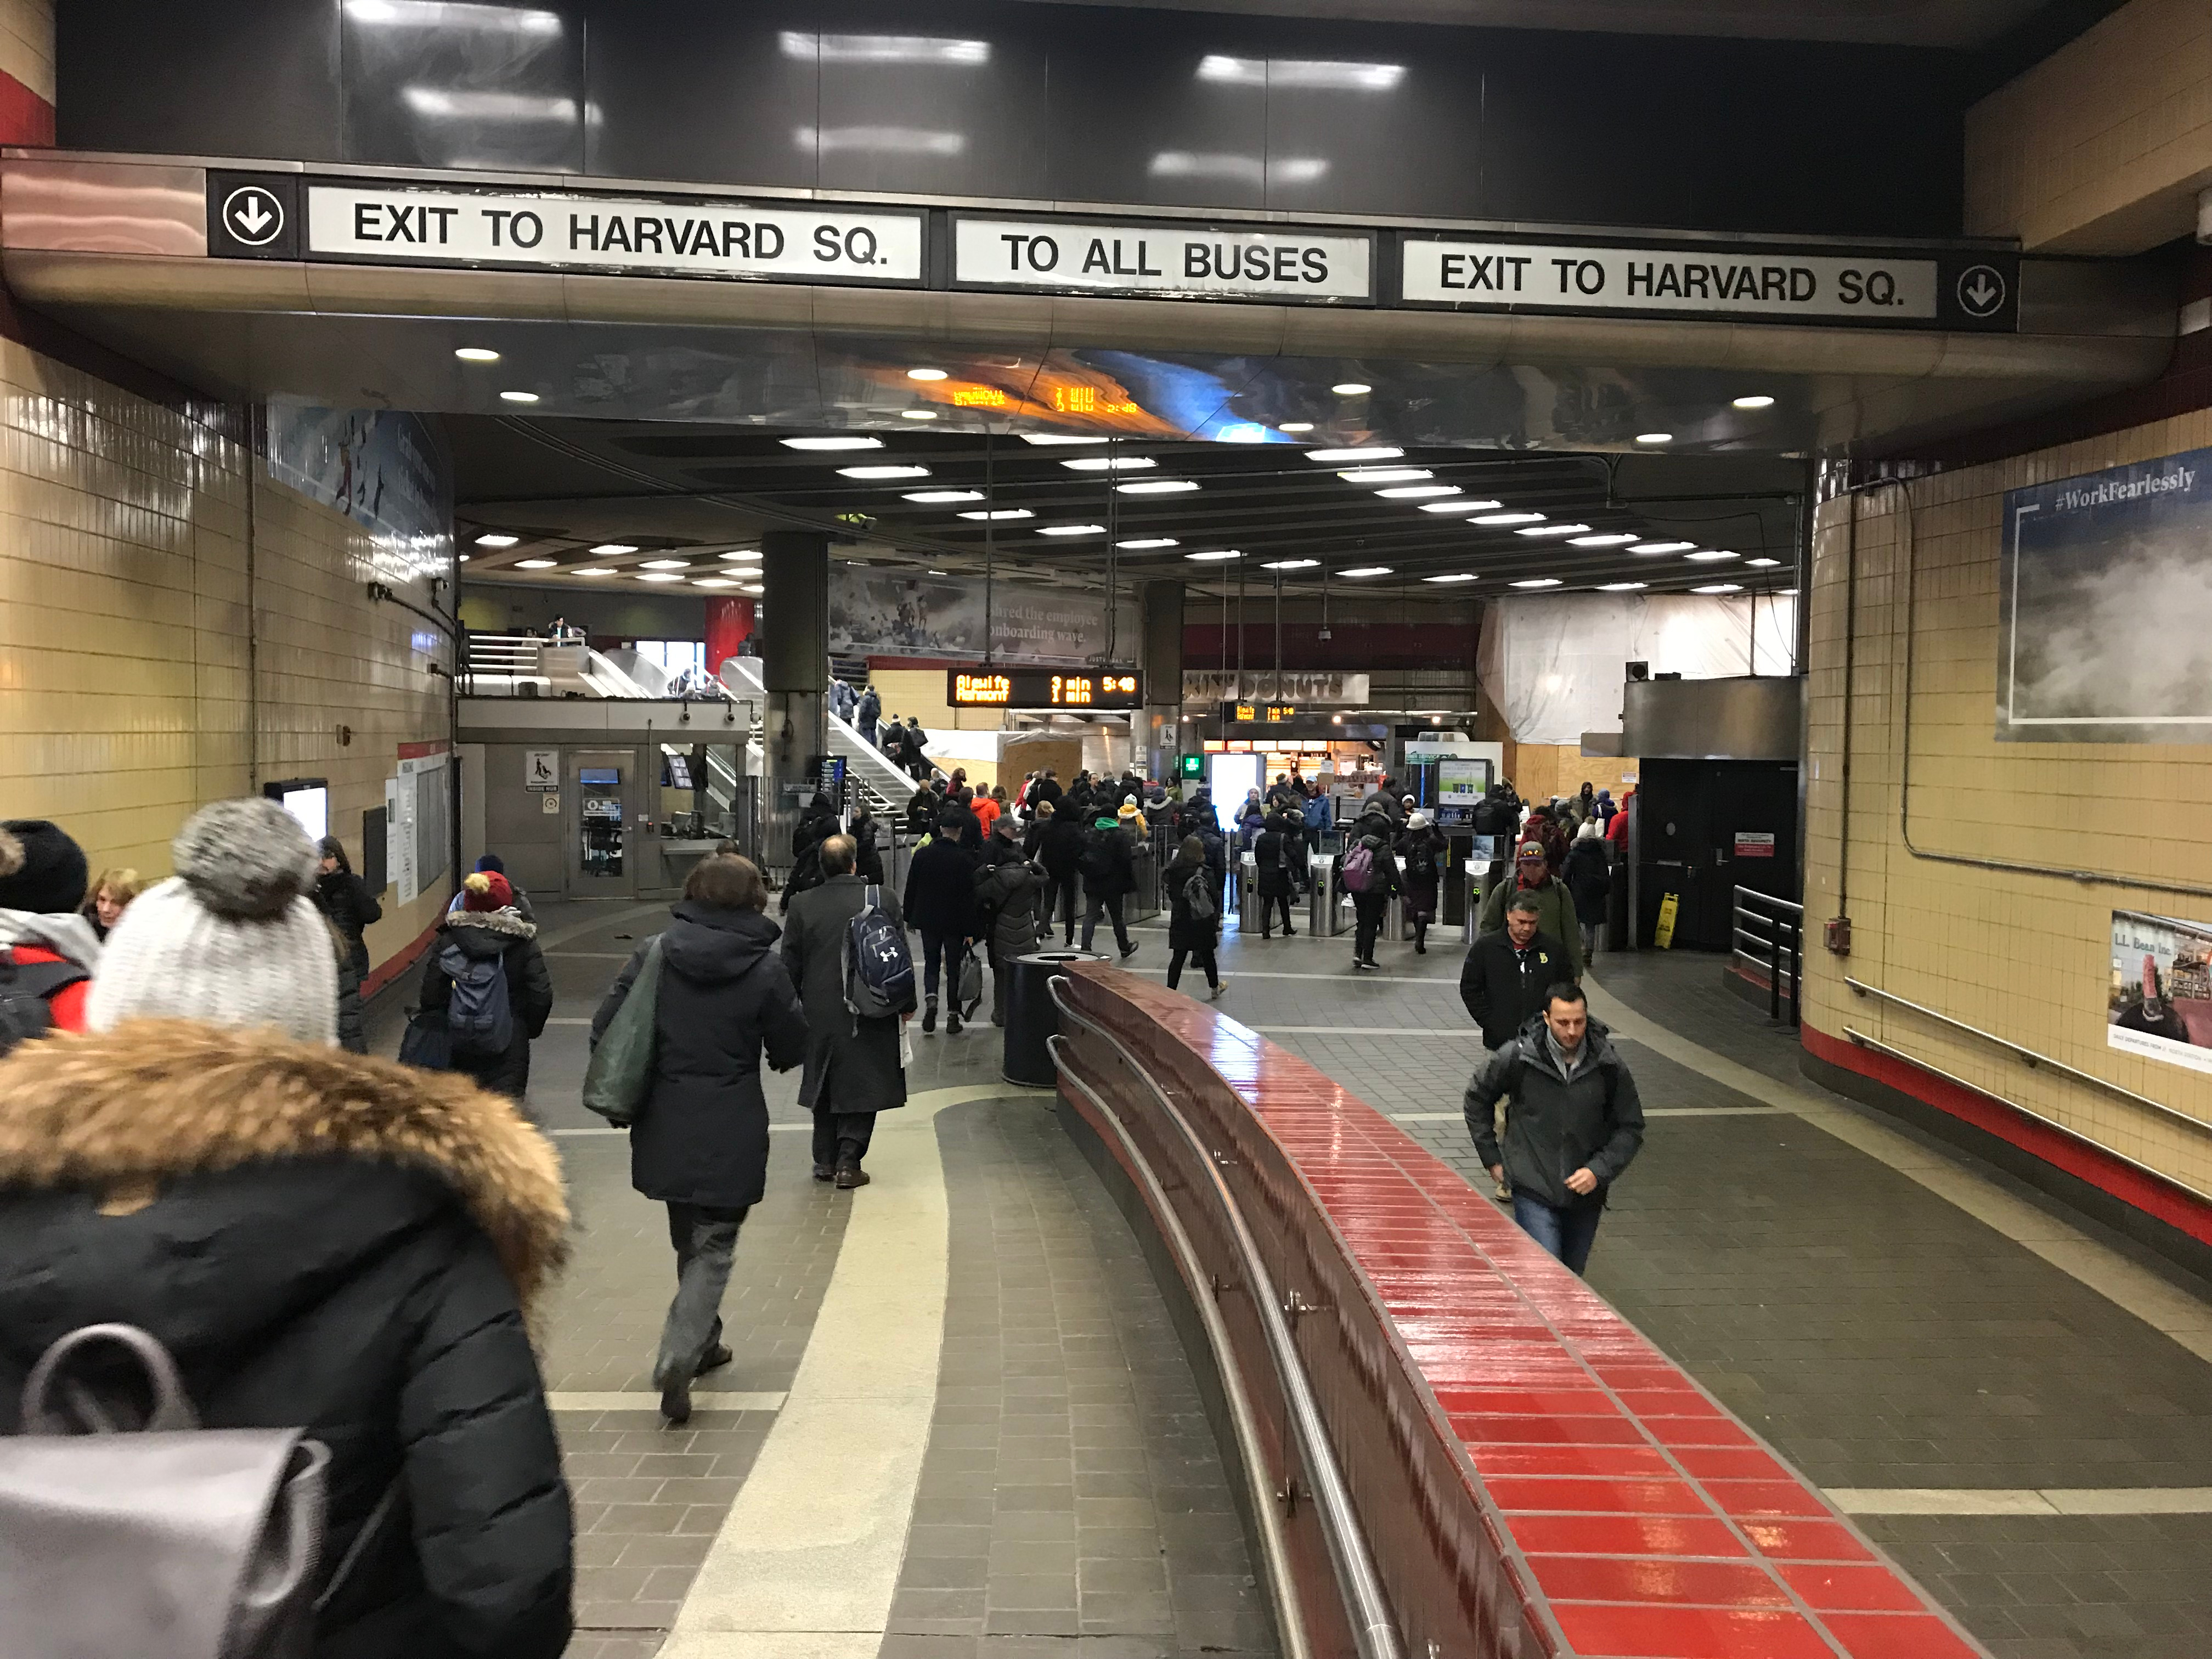 A busy subway station with people walking in different directions toward outgoing and incoming train lines.